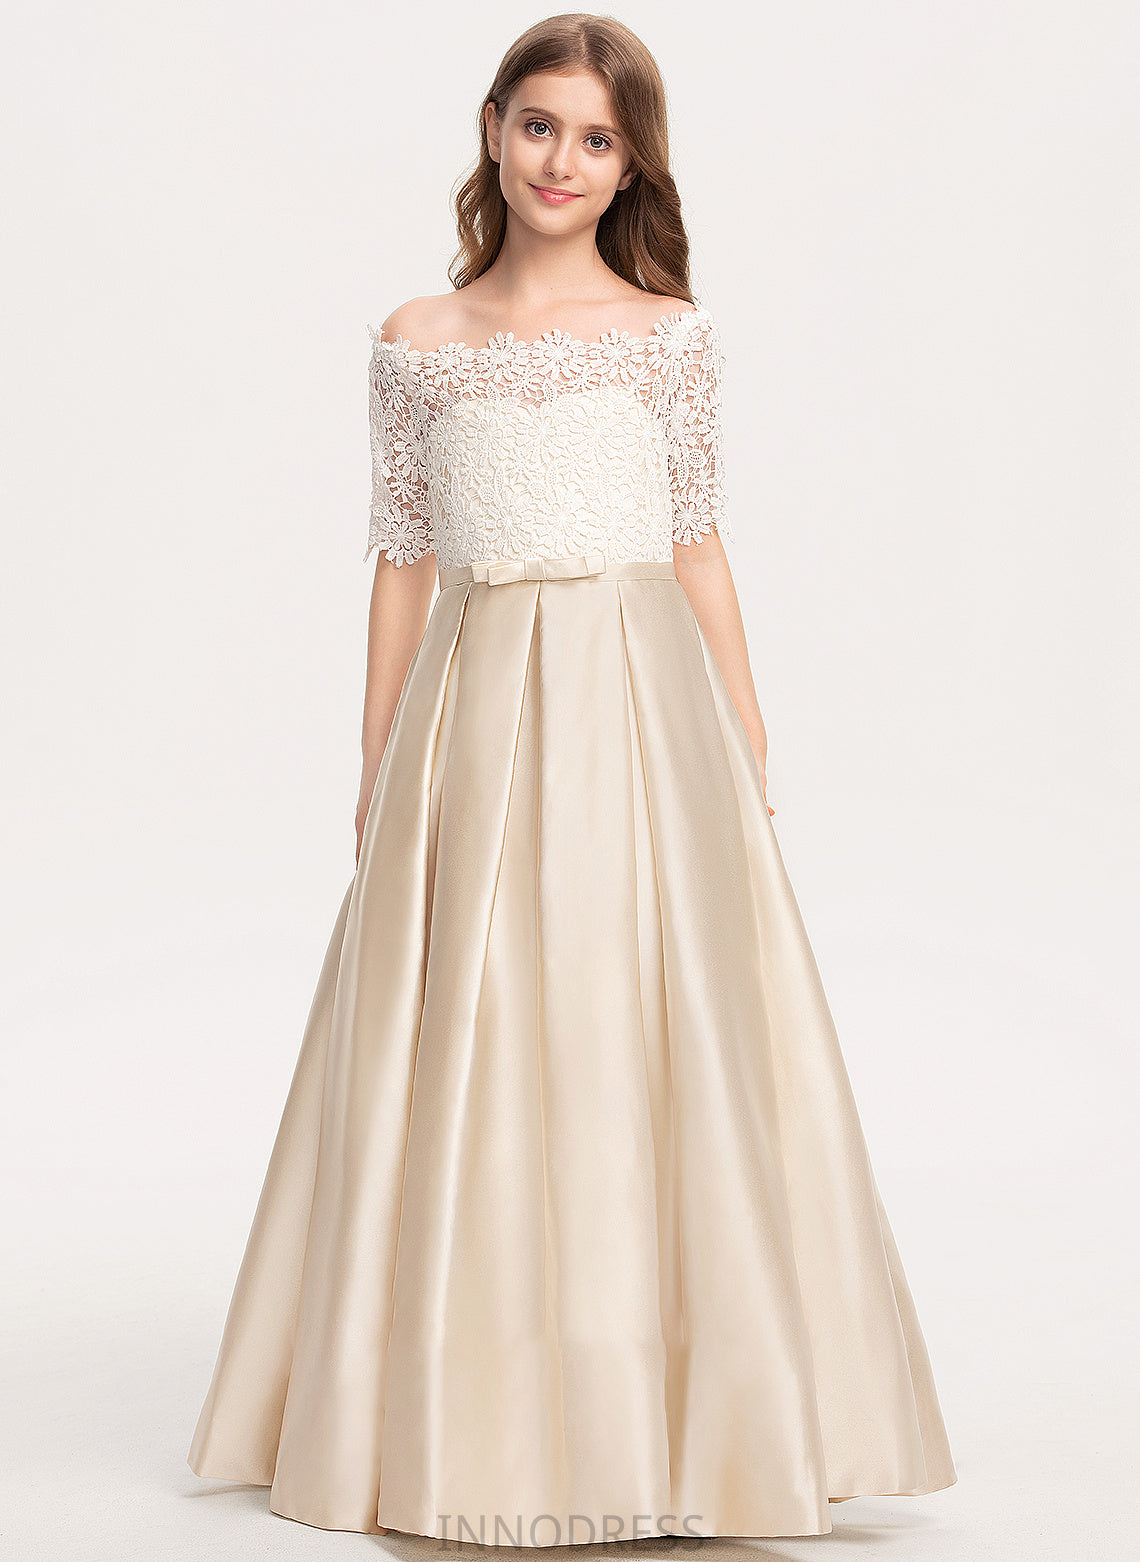 Ball-Gown/Princess Evie Junior Bridesmaid Dresses Floor-Length Lace Satin Bow(s) Off-the-Shoulder Pockets With